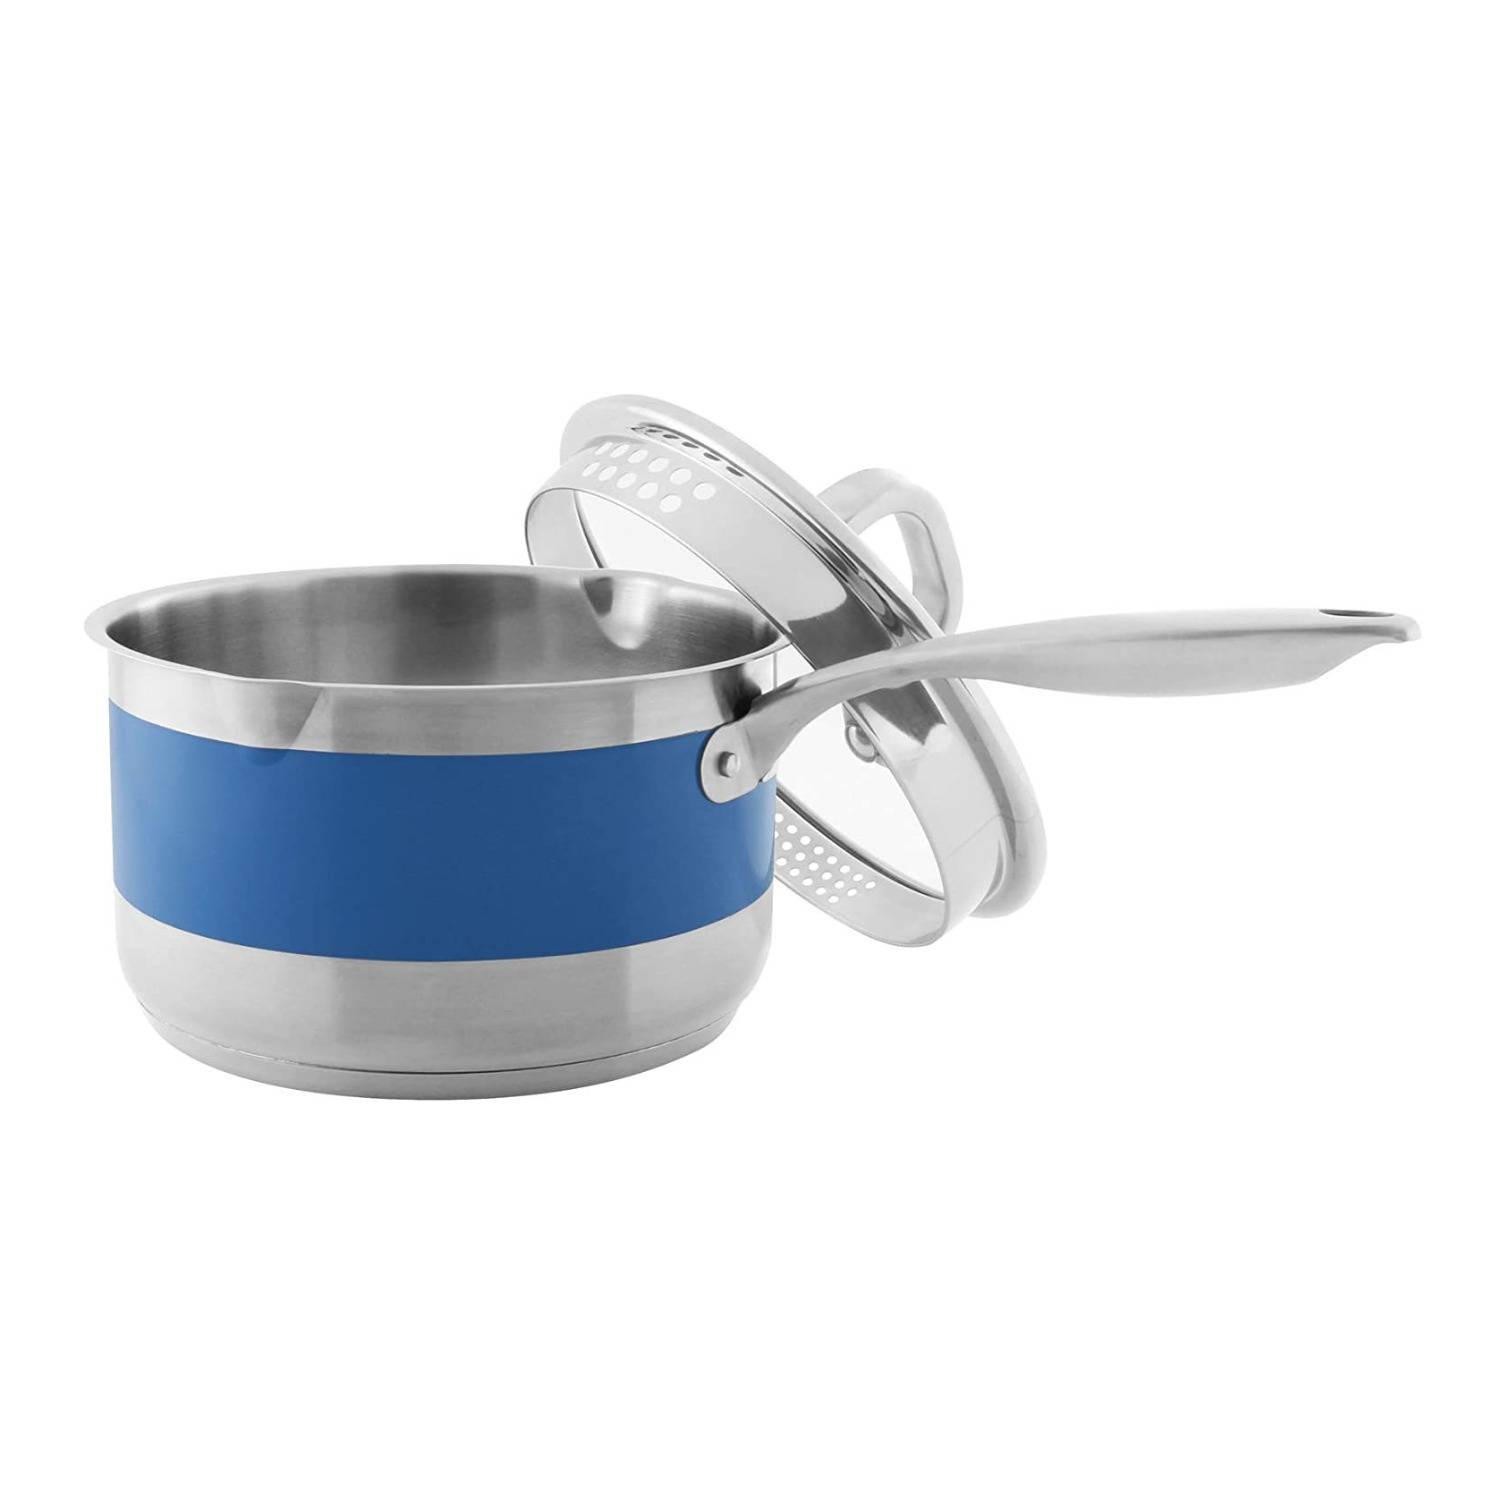 Chantal Stripes 2.5-Quart Pouring Saucepan with Strainer Glass Lid and Blue Cove Band